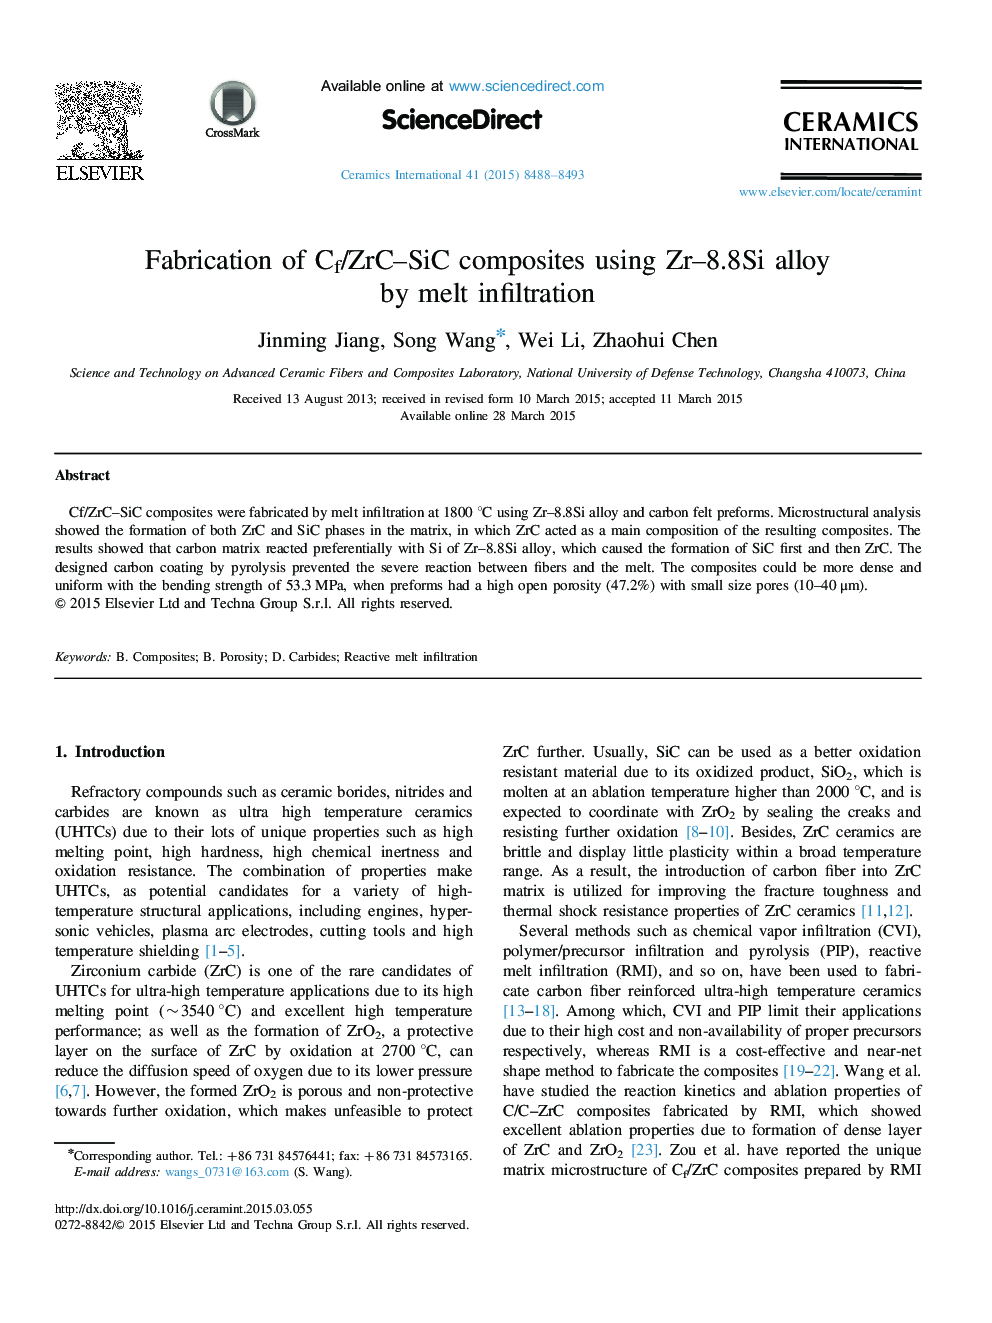 Fabrication of Cf/ZrC-SiC composites using Zr-8.8Si alloy by melt infiltration